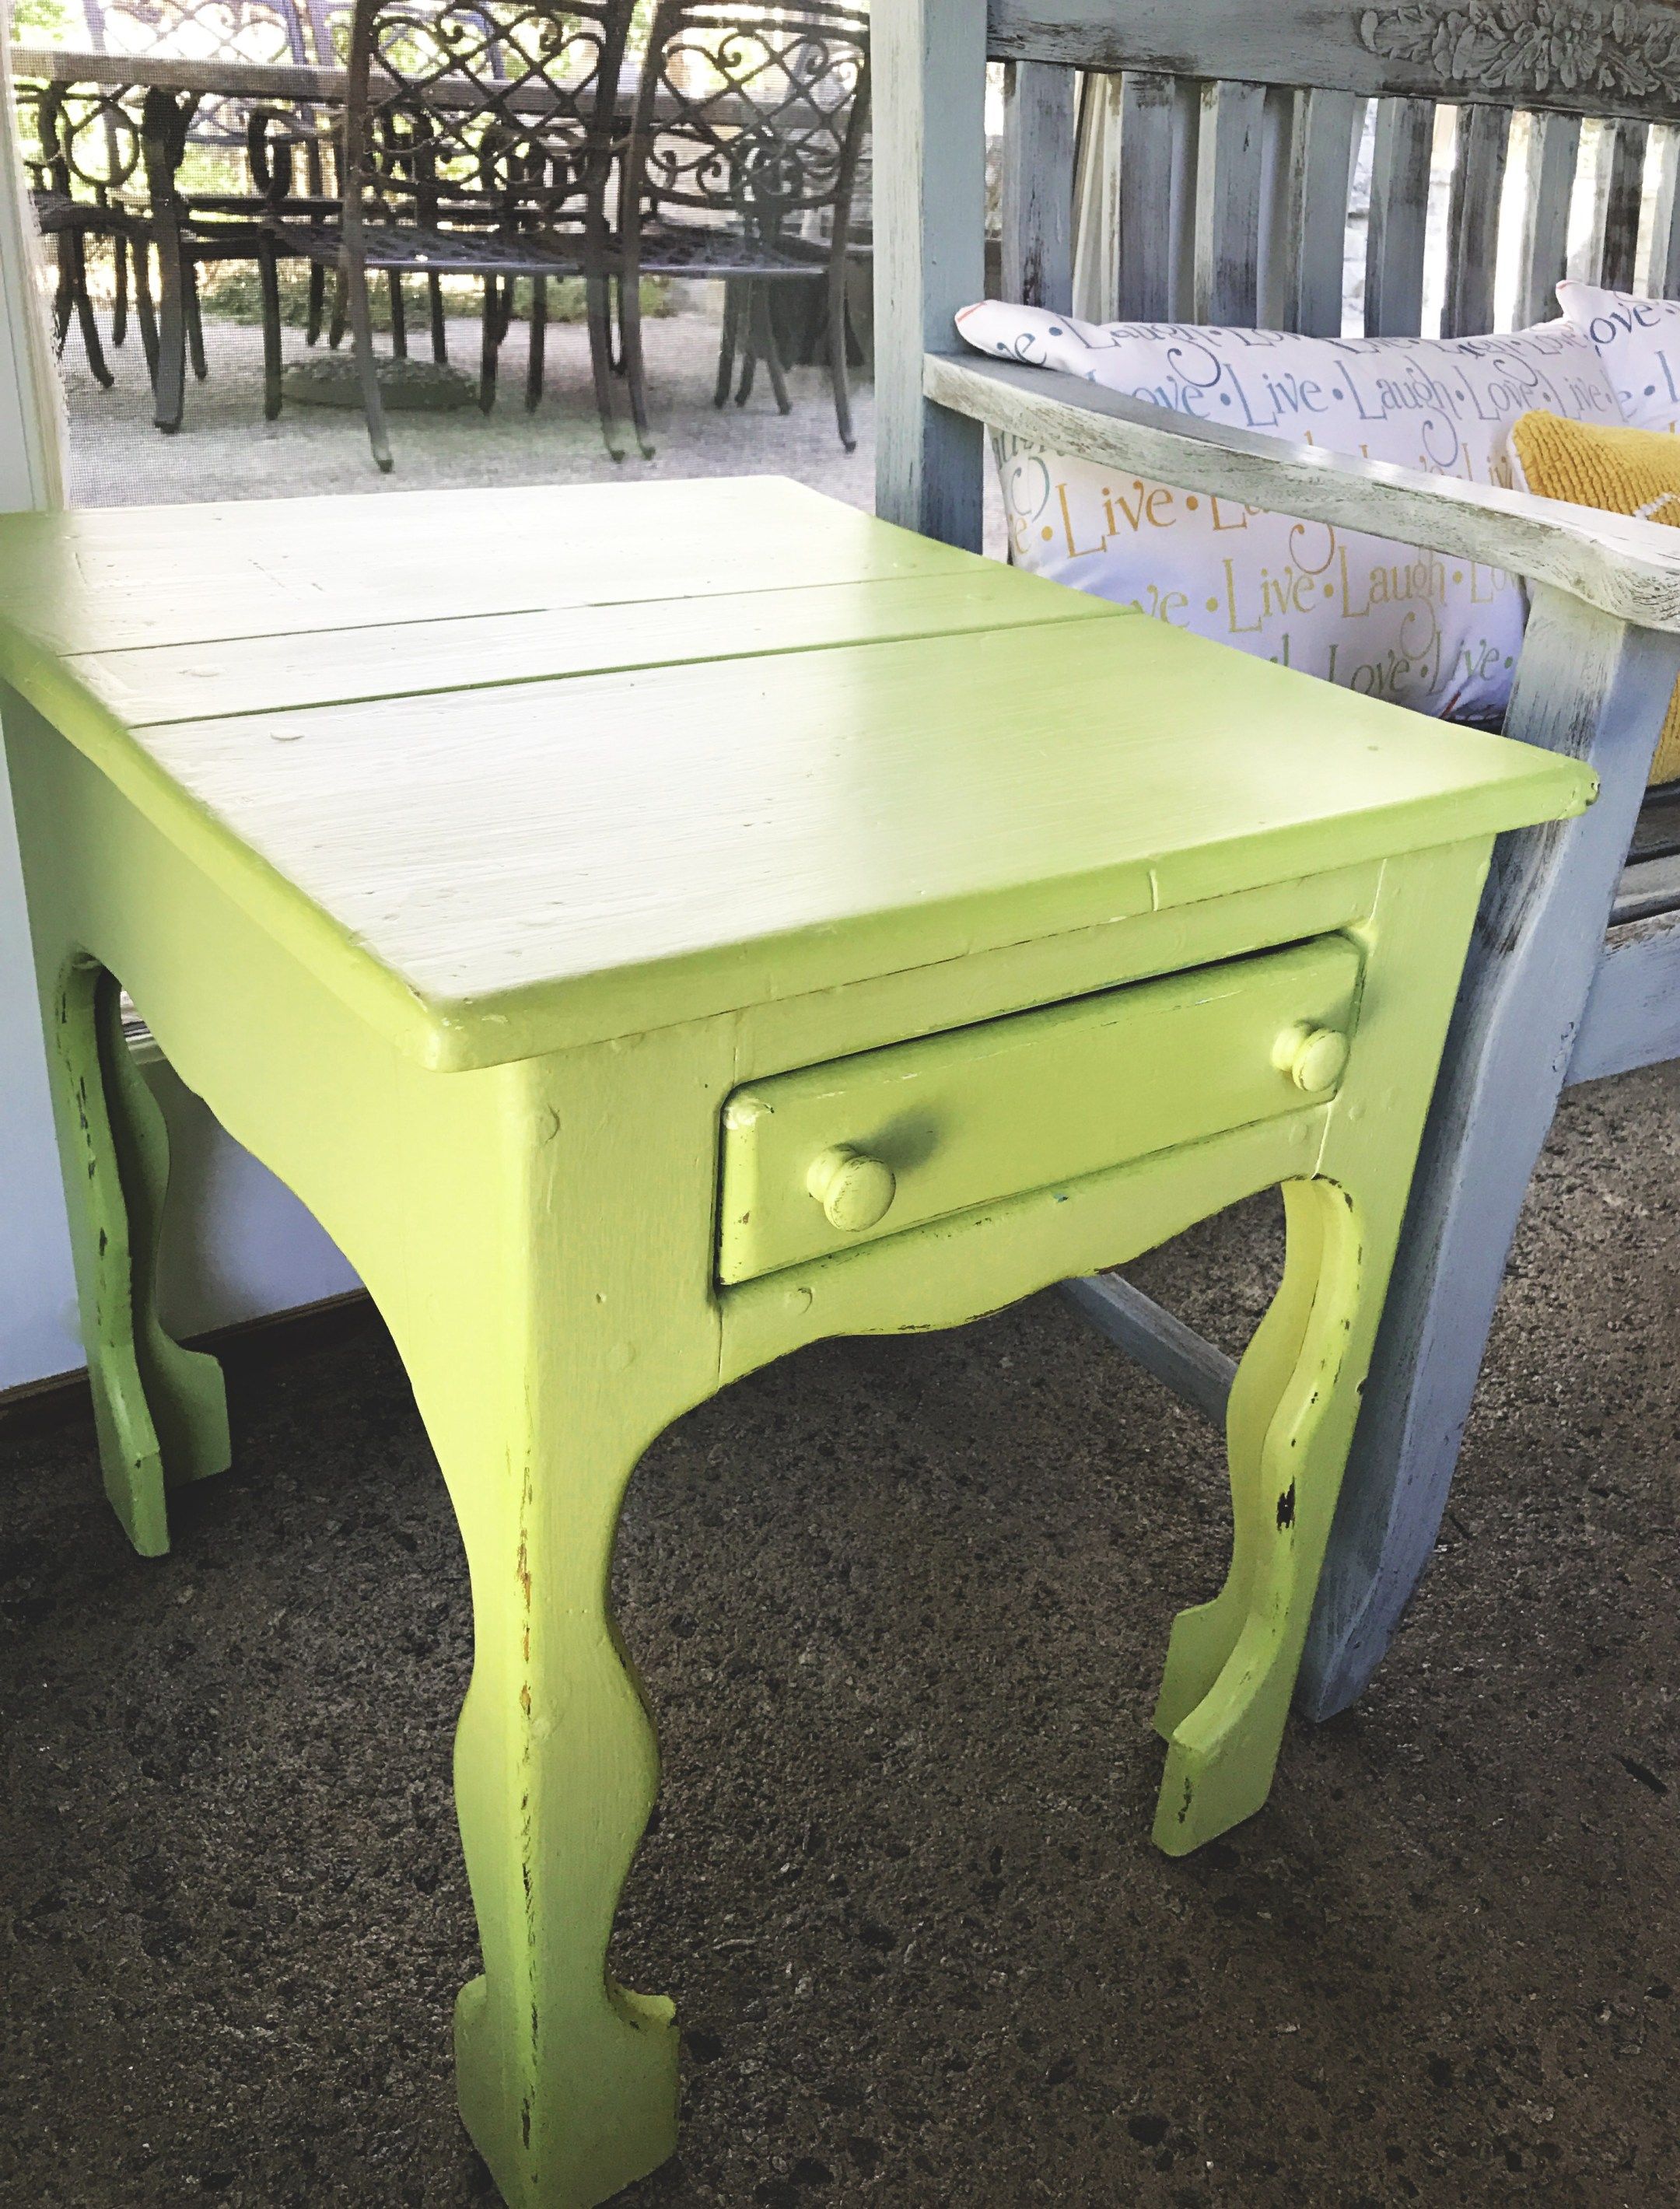 How to Paint and Protect Outdoor Wood Furniture - The Chelsea Project